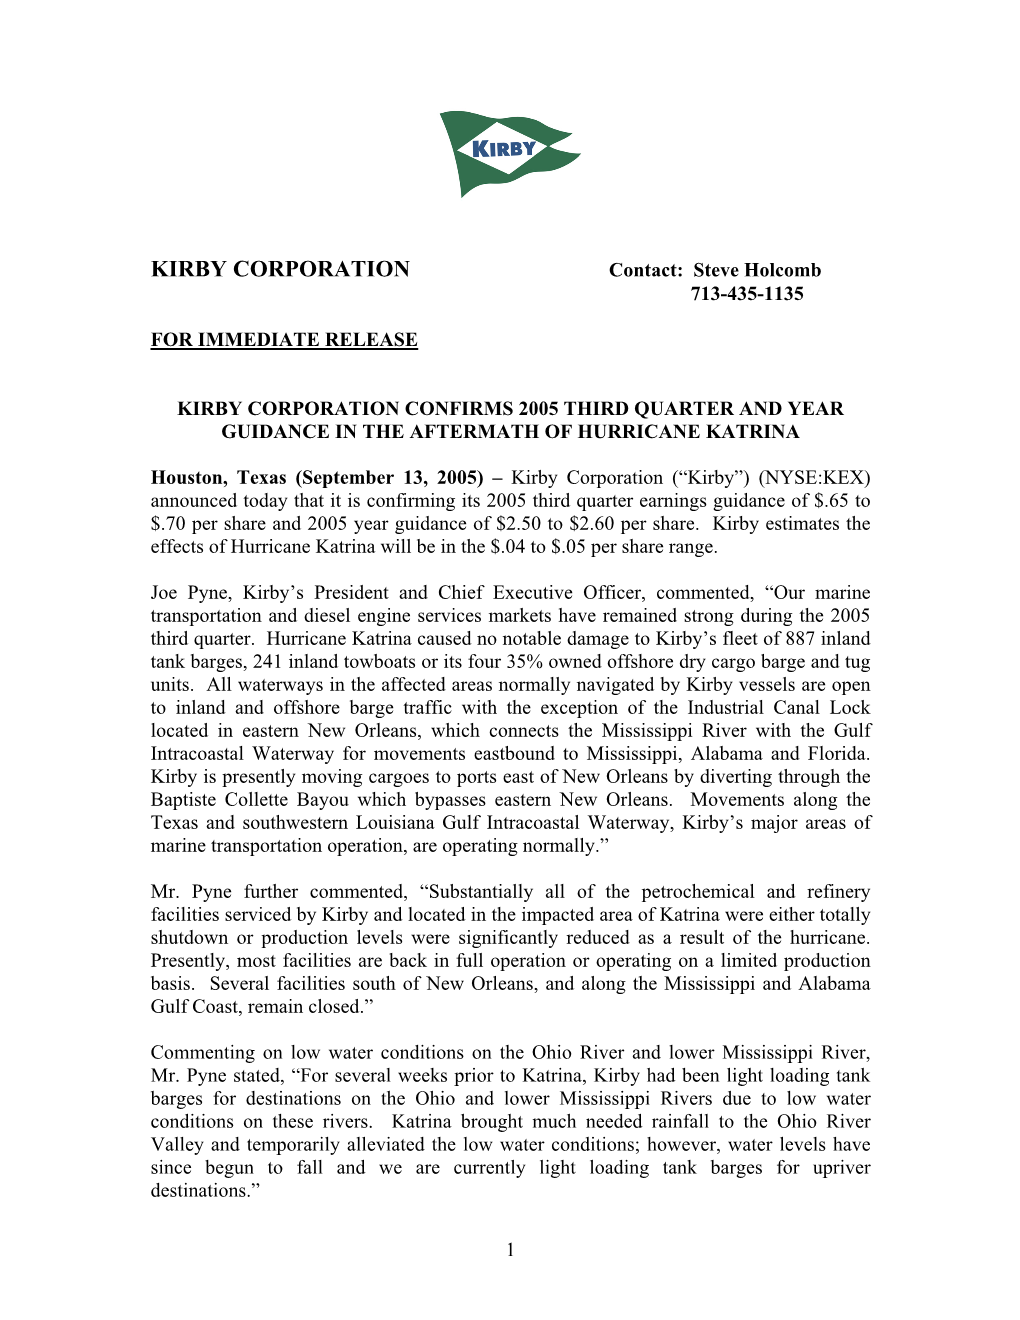 Kirby Corporation Confirms 2005 Third Quarter and Year Guidance in the Aftermath of Hurricane Katrina